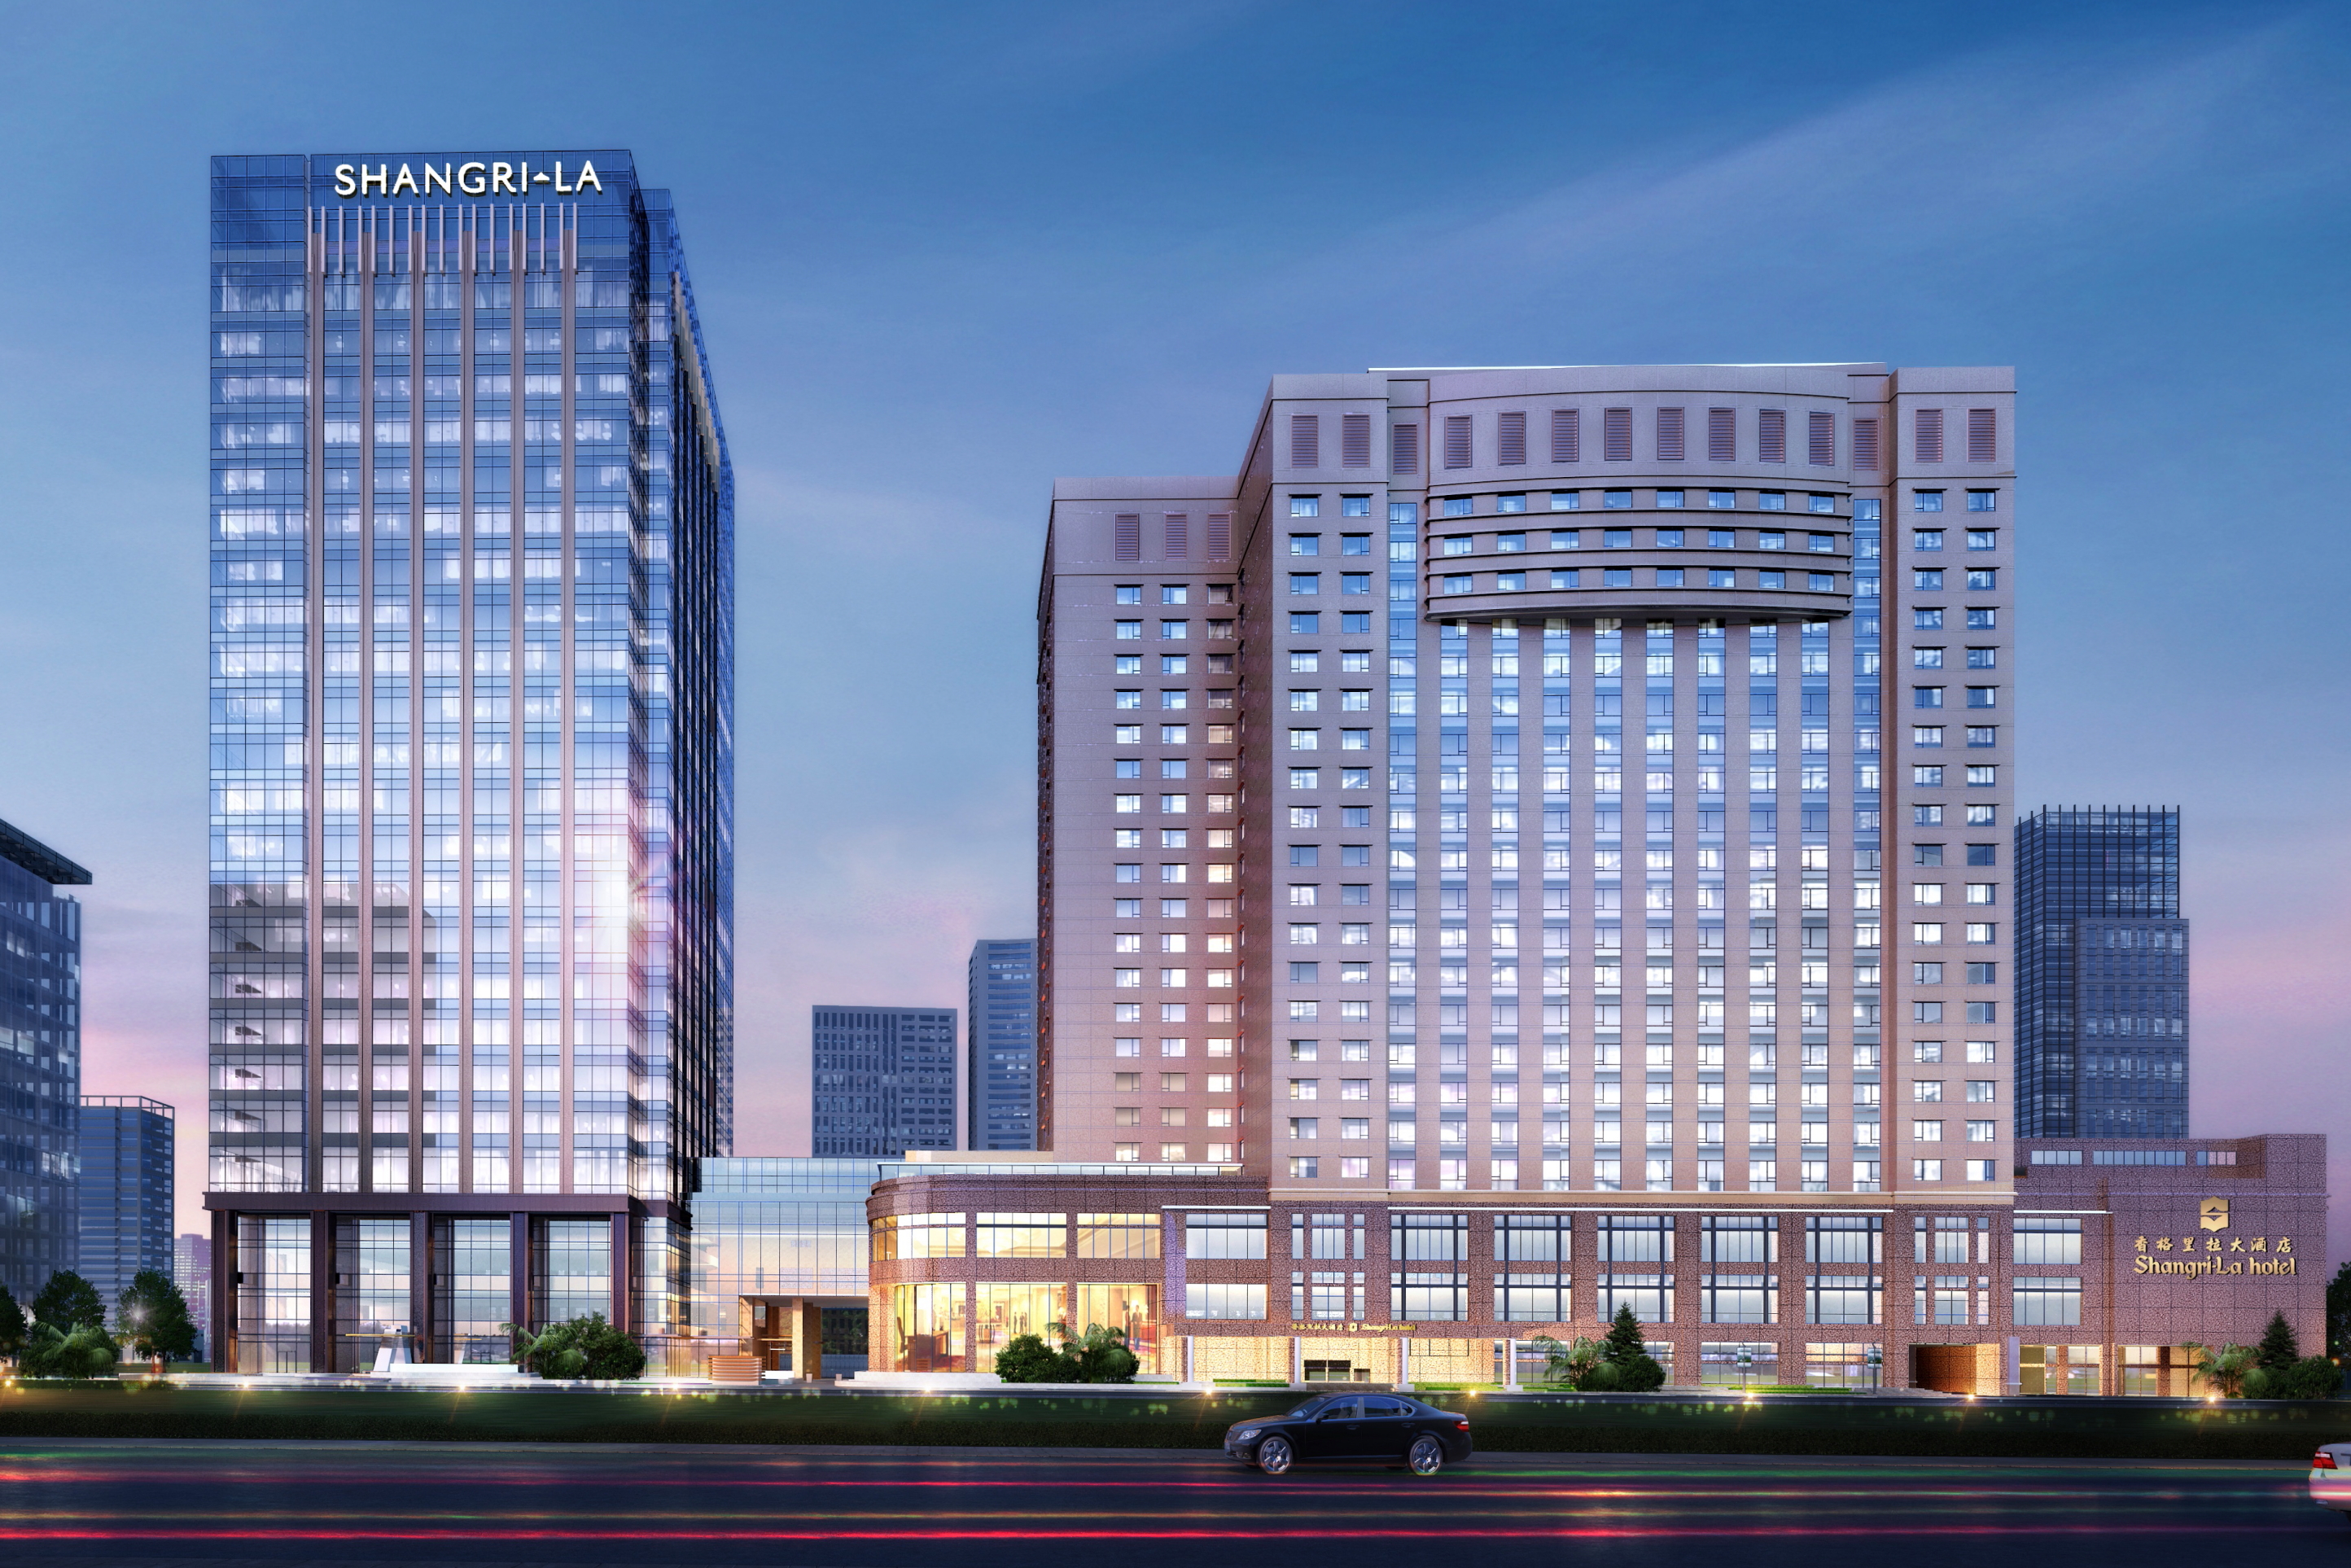 The Shangri-La Centre, Wuhan office building is located next to the Shangri-La Hotel, Wuhan. Click to enlarge.